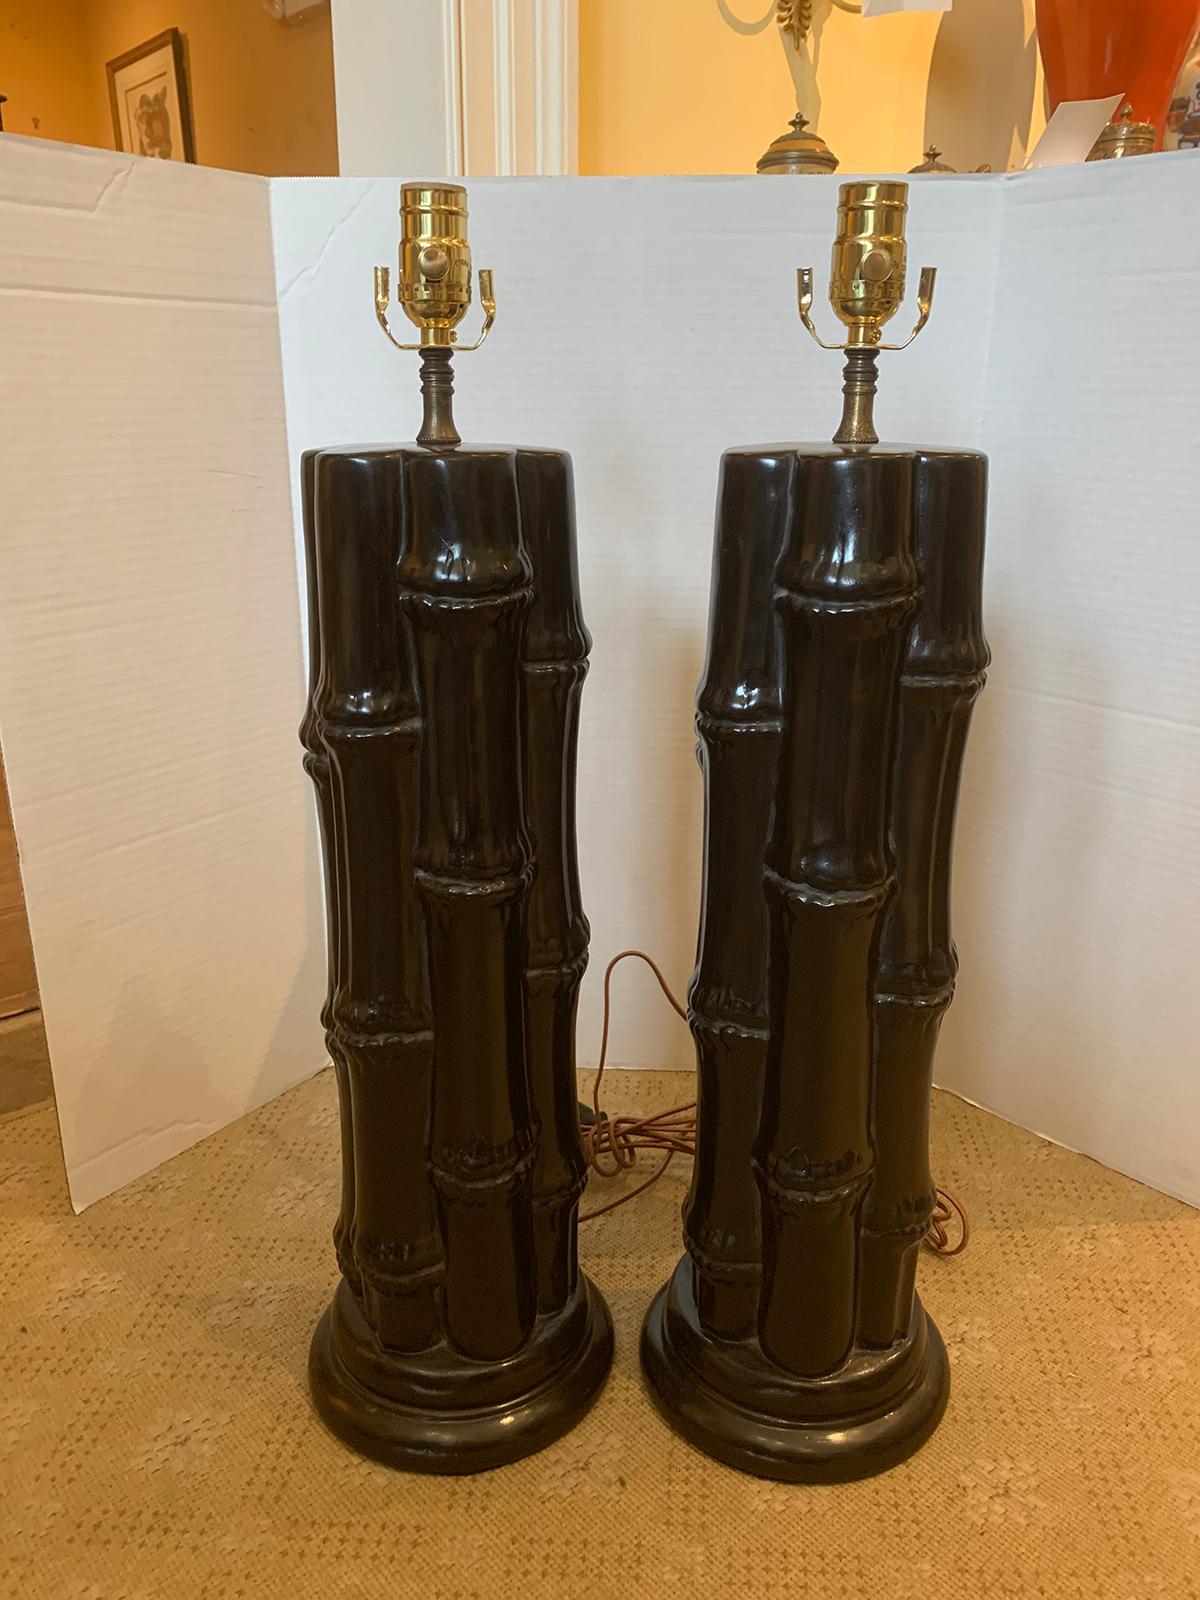 Pair of mid-20th century ebonized faux bamboo column lamps.
New wiring.